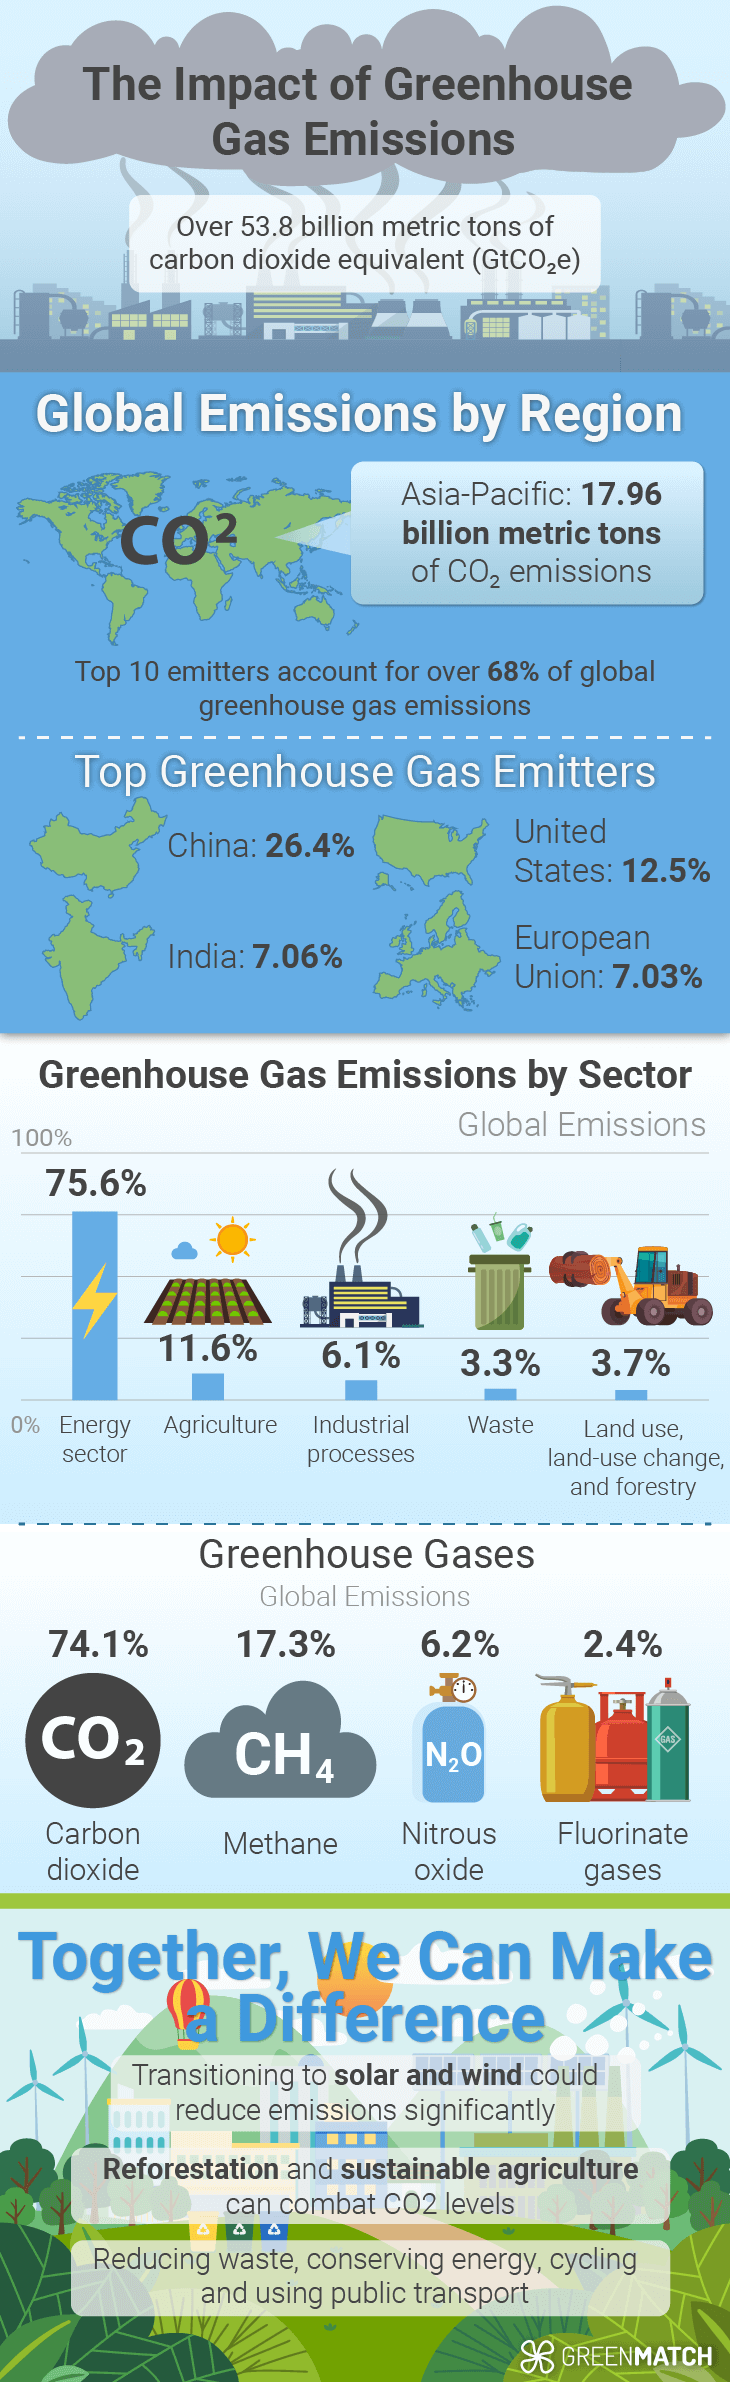 The environmental impact of gas emissions